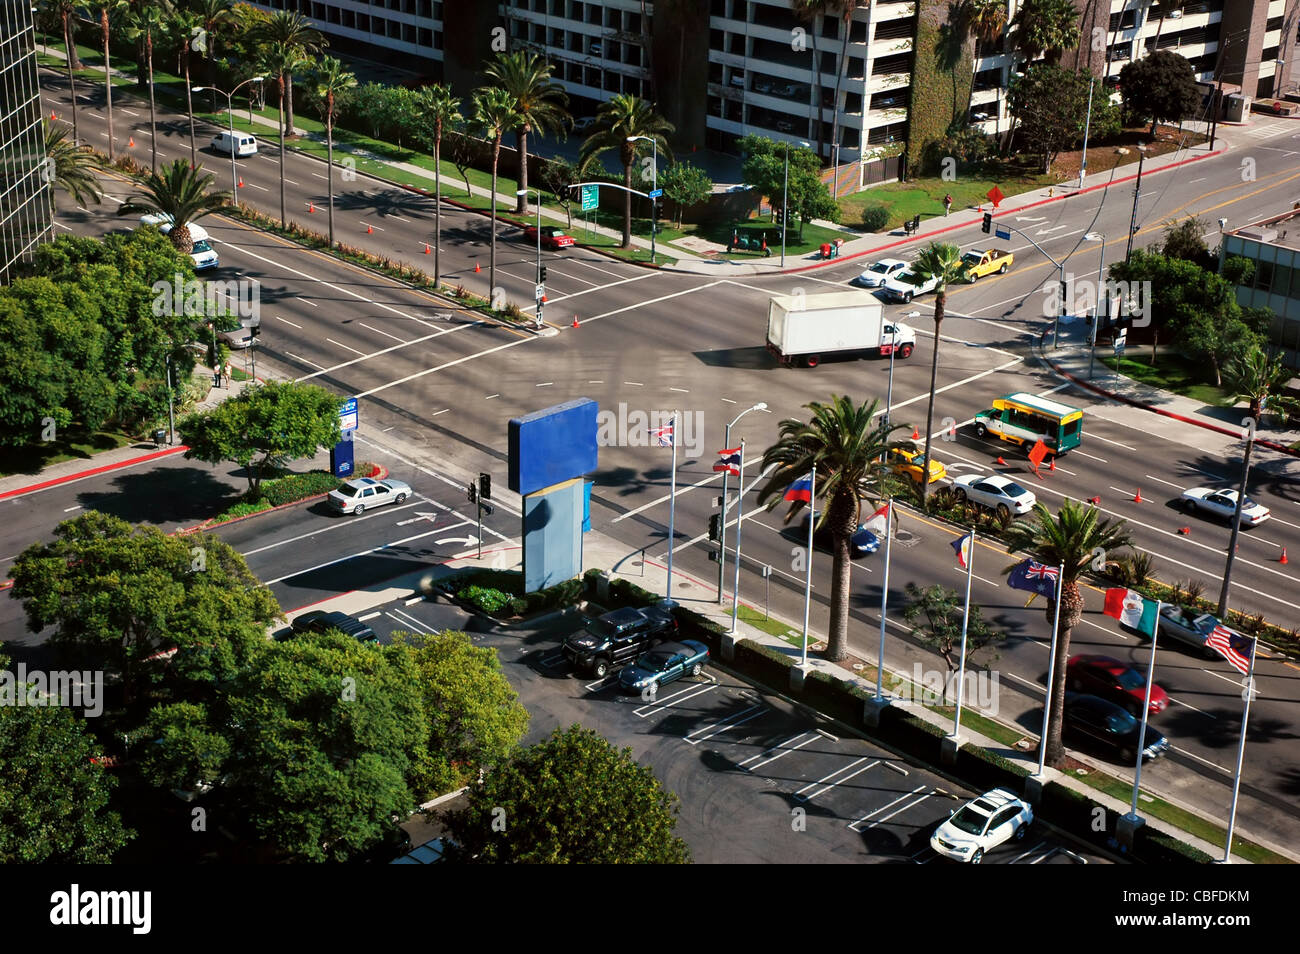 Busy intersection near LAX airport, Los Angeles, California Stock Photo